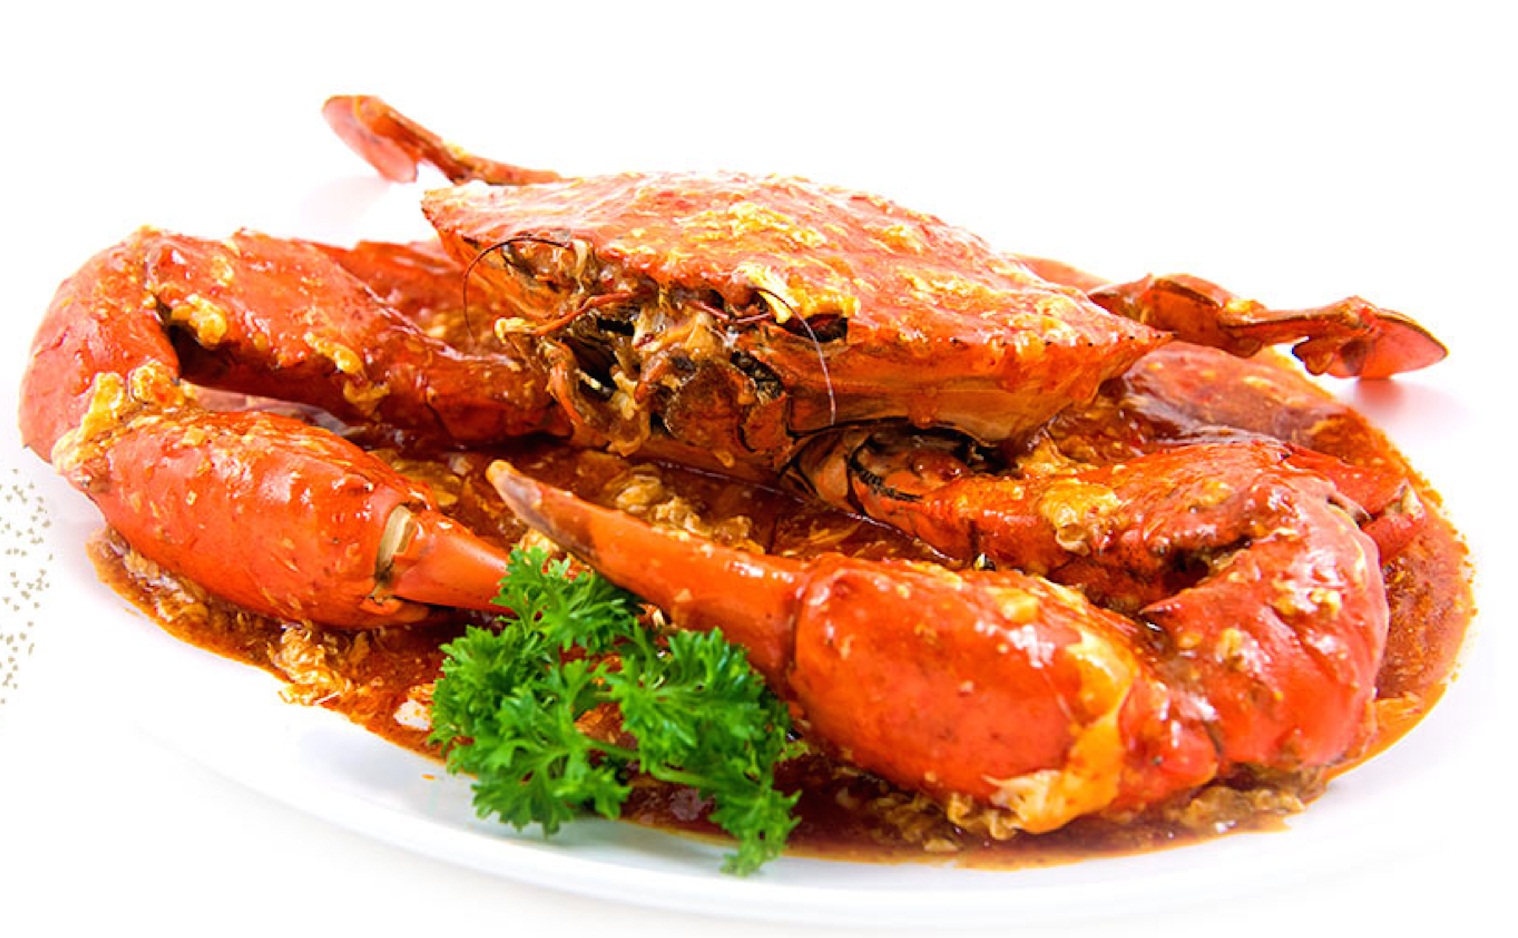 Crab Benefits - Canned Crab Meats, Canned Crab Meat Suppliers,Indonesia